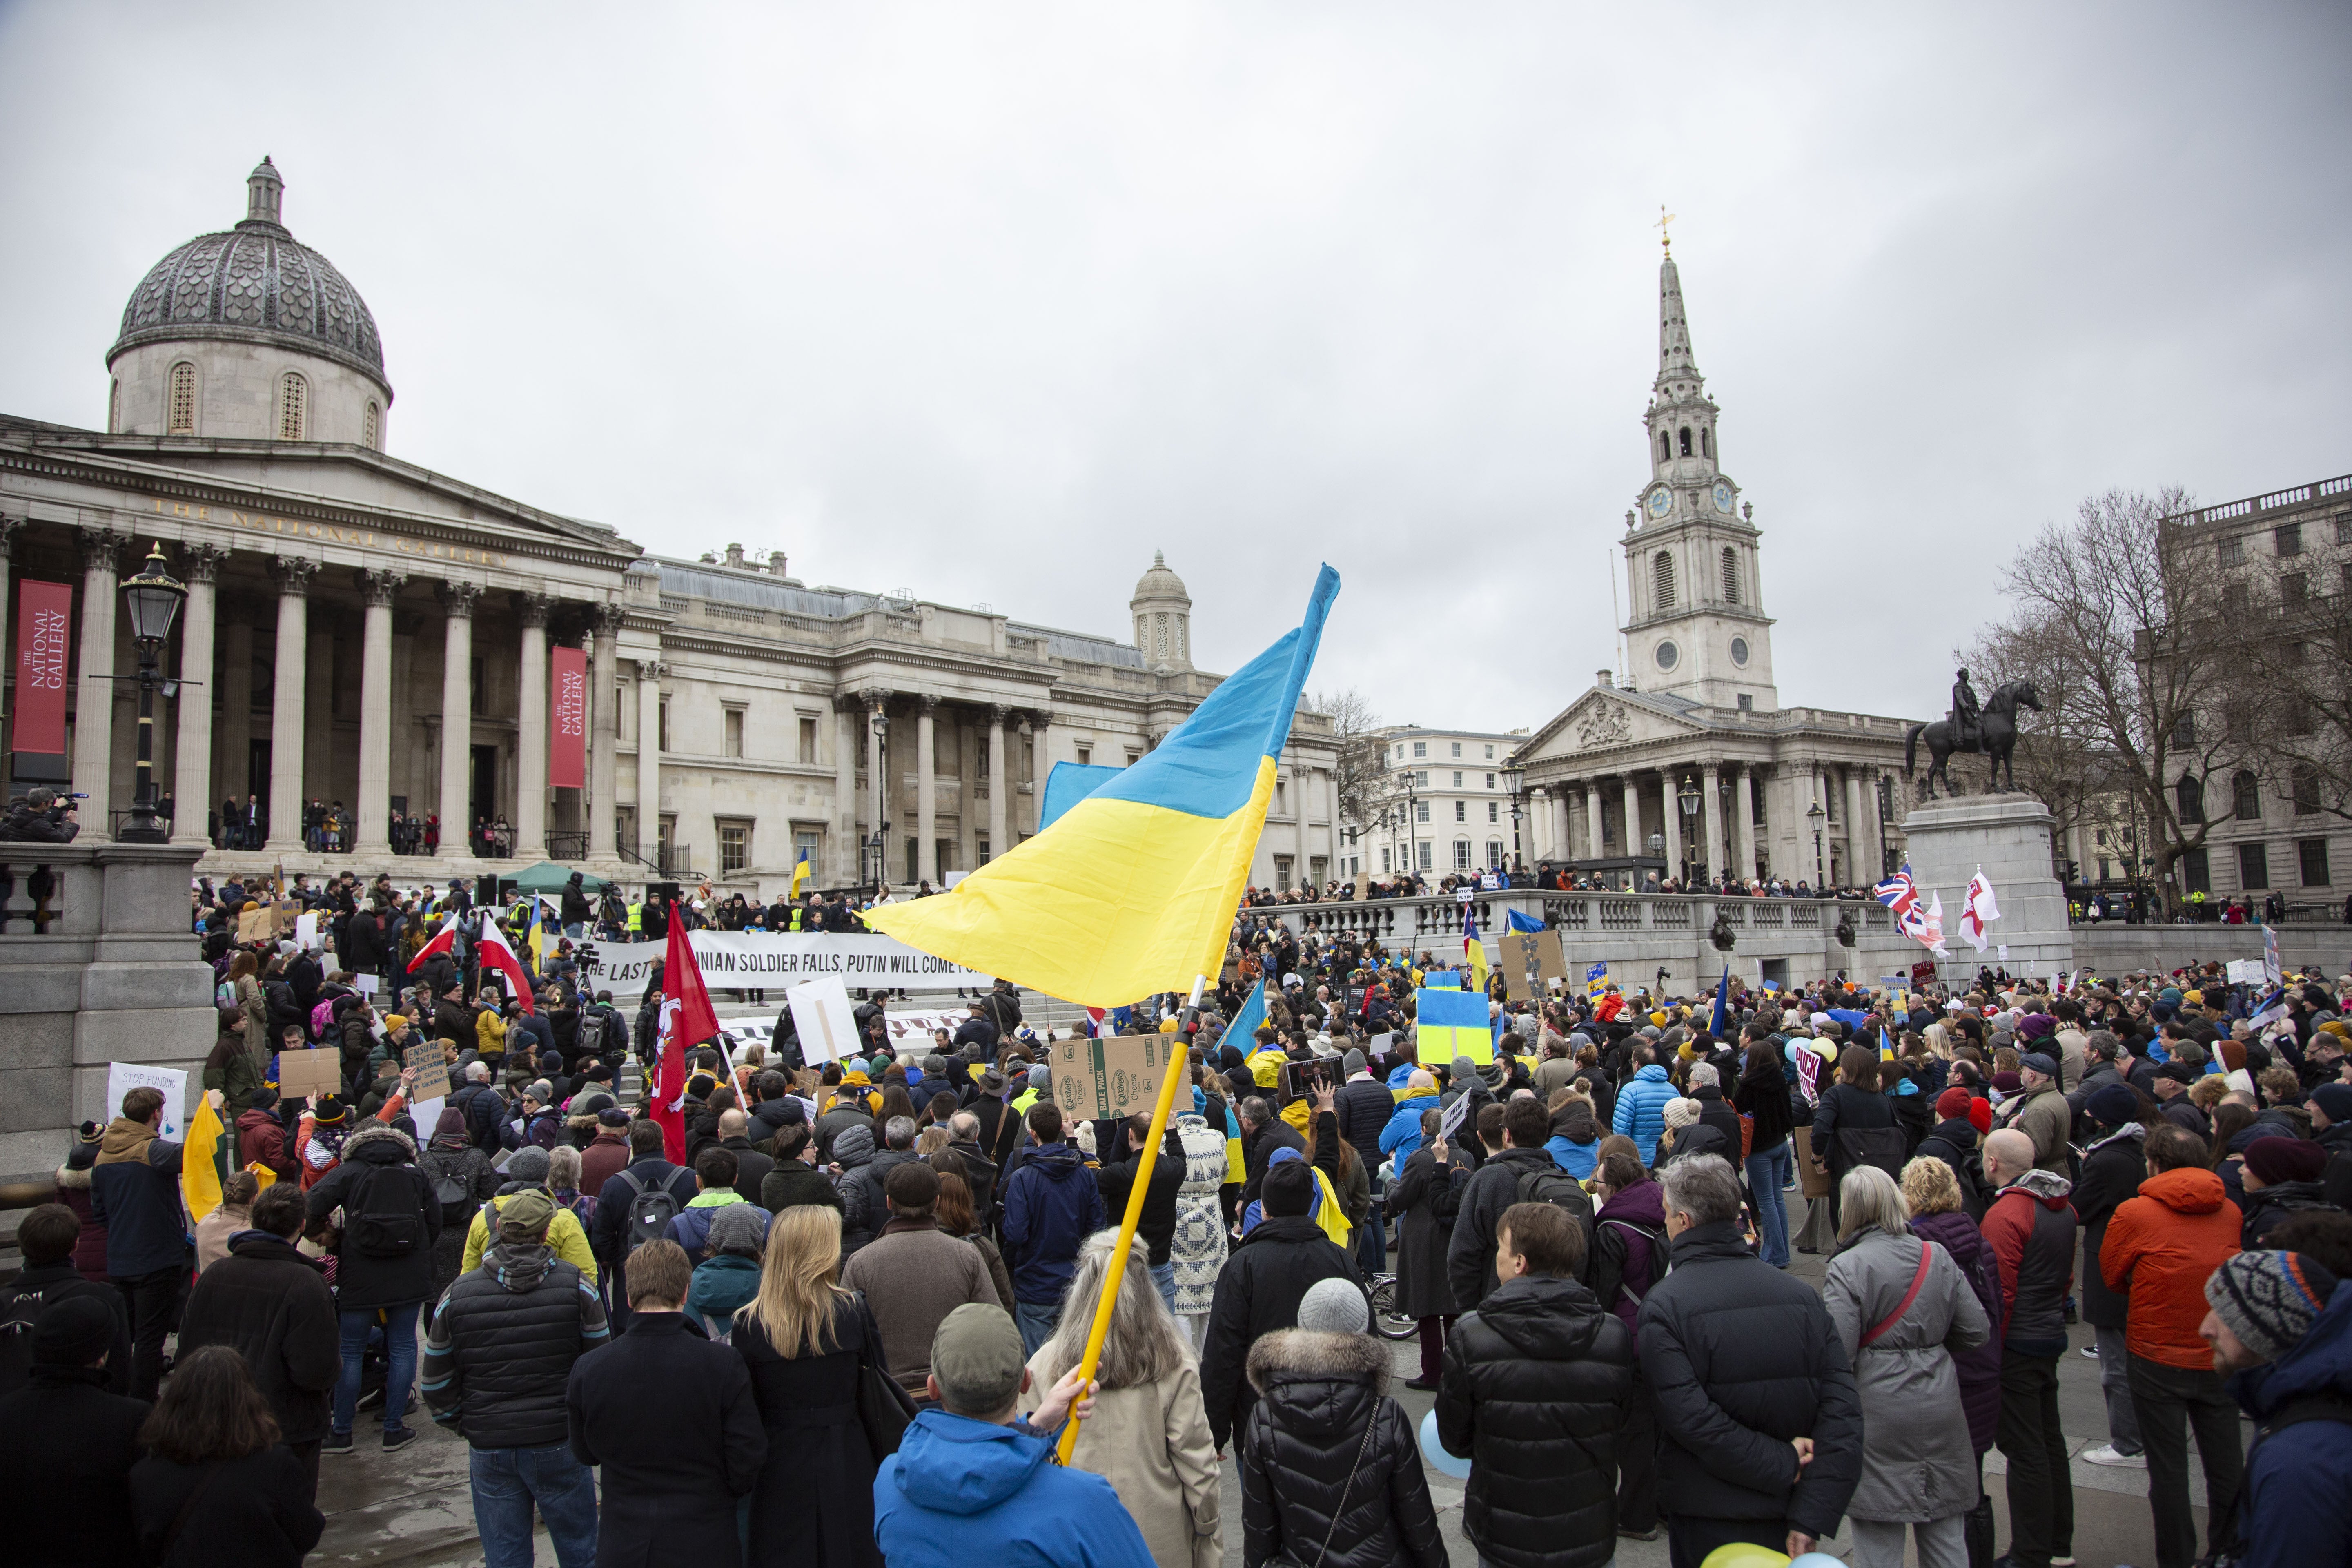 The Stand with Ukraine demonstration in Trafalgar Square